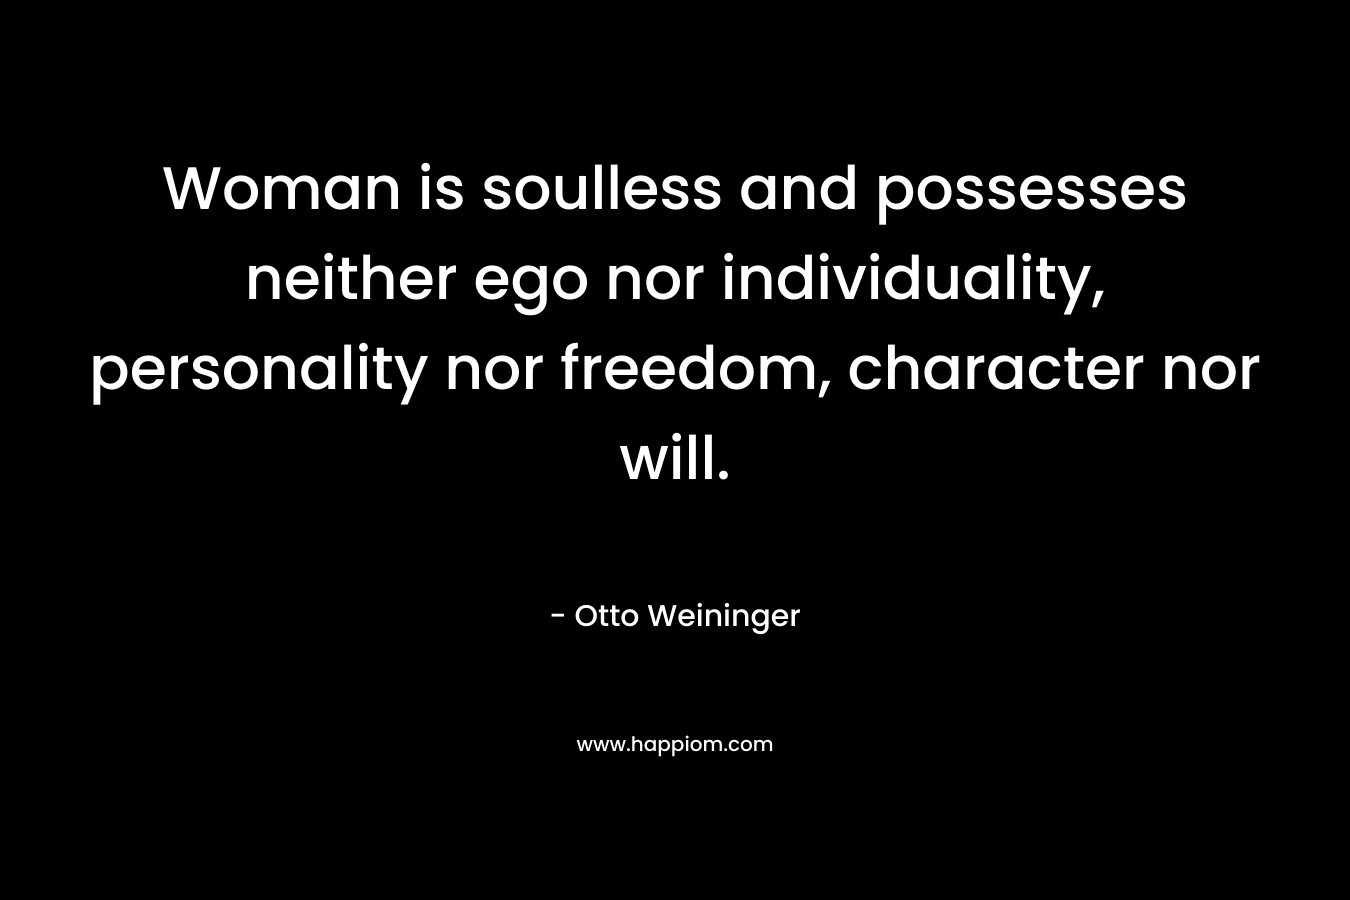 Woman is soulless and possesses neither ego nor individuality, personality nor freedom, character nor will.